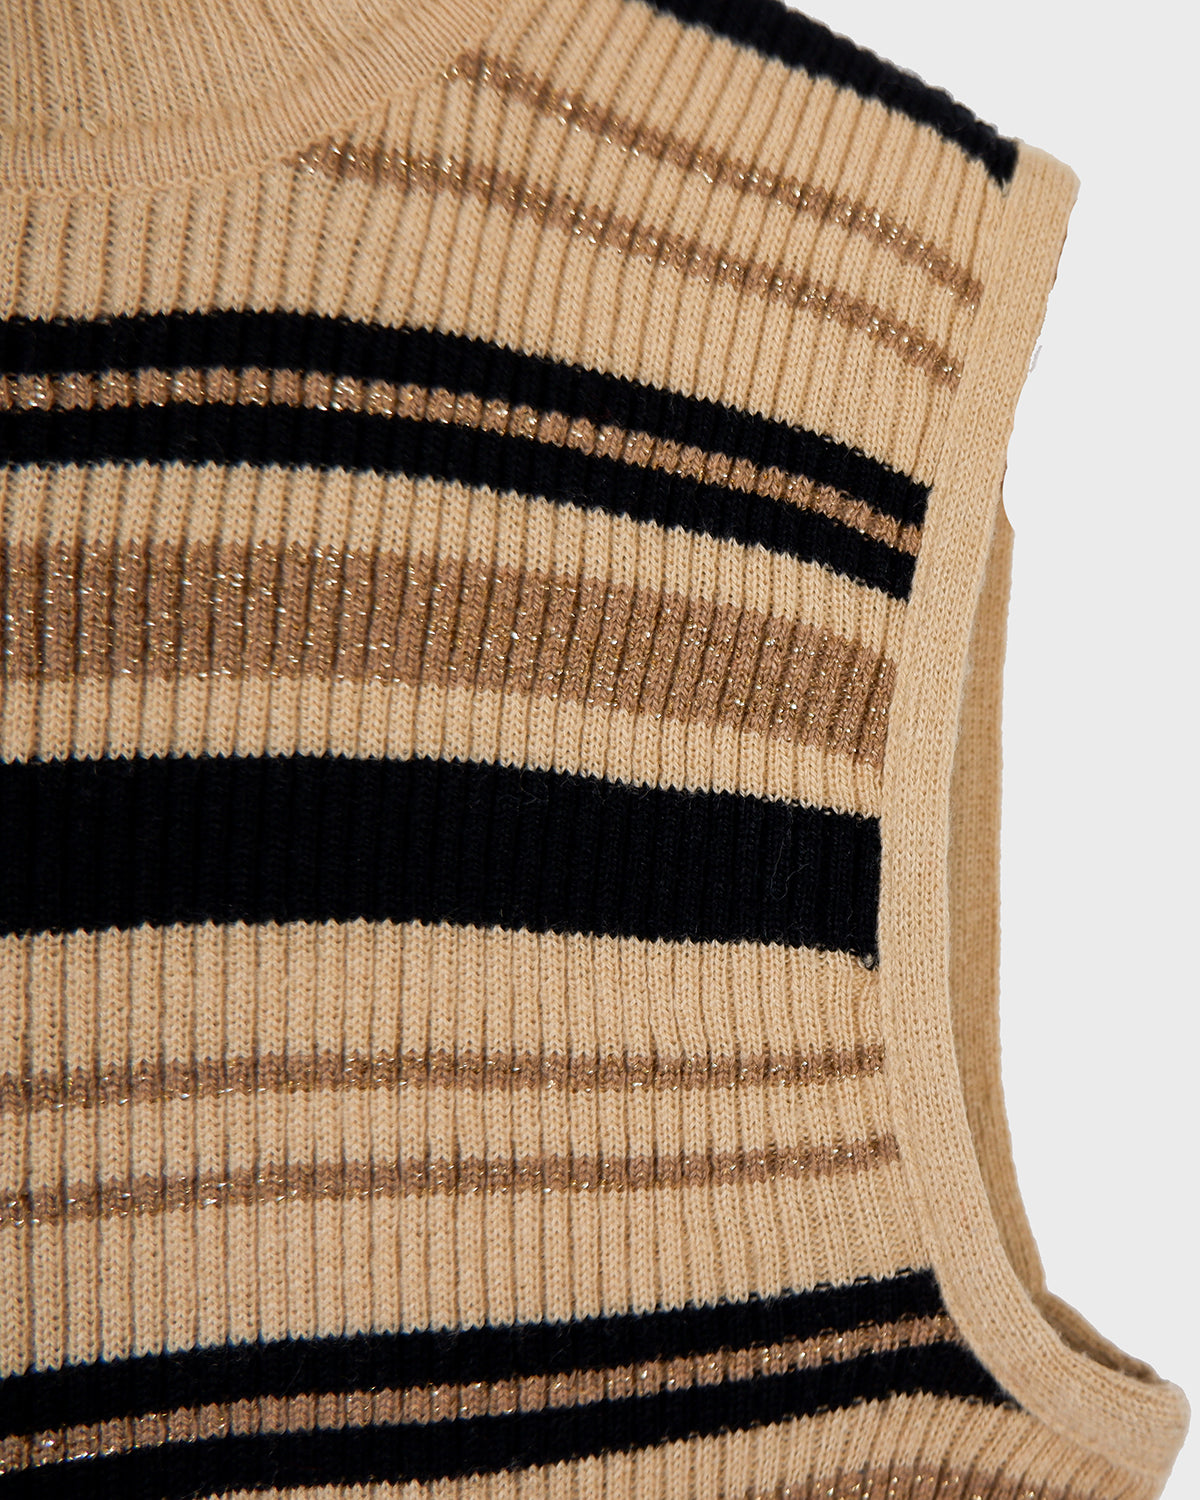 Get ready to slip into this vintage 90s shimmering brown striped turtleneck slipover!